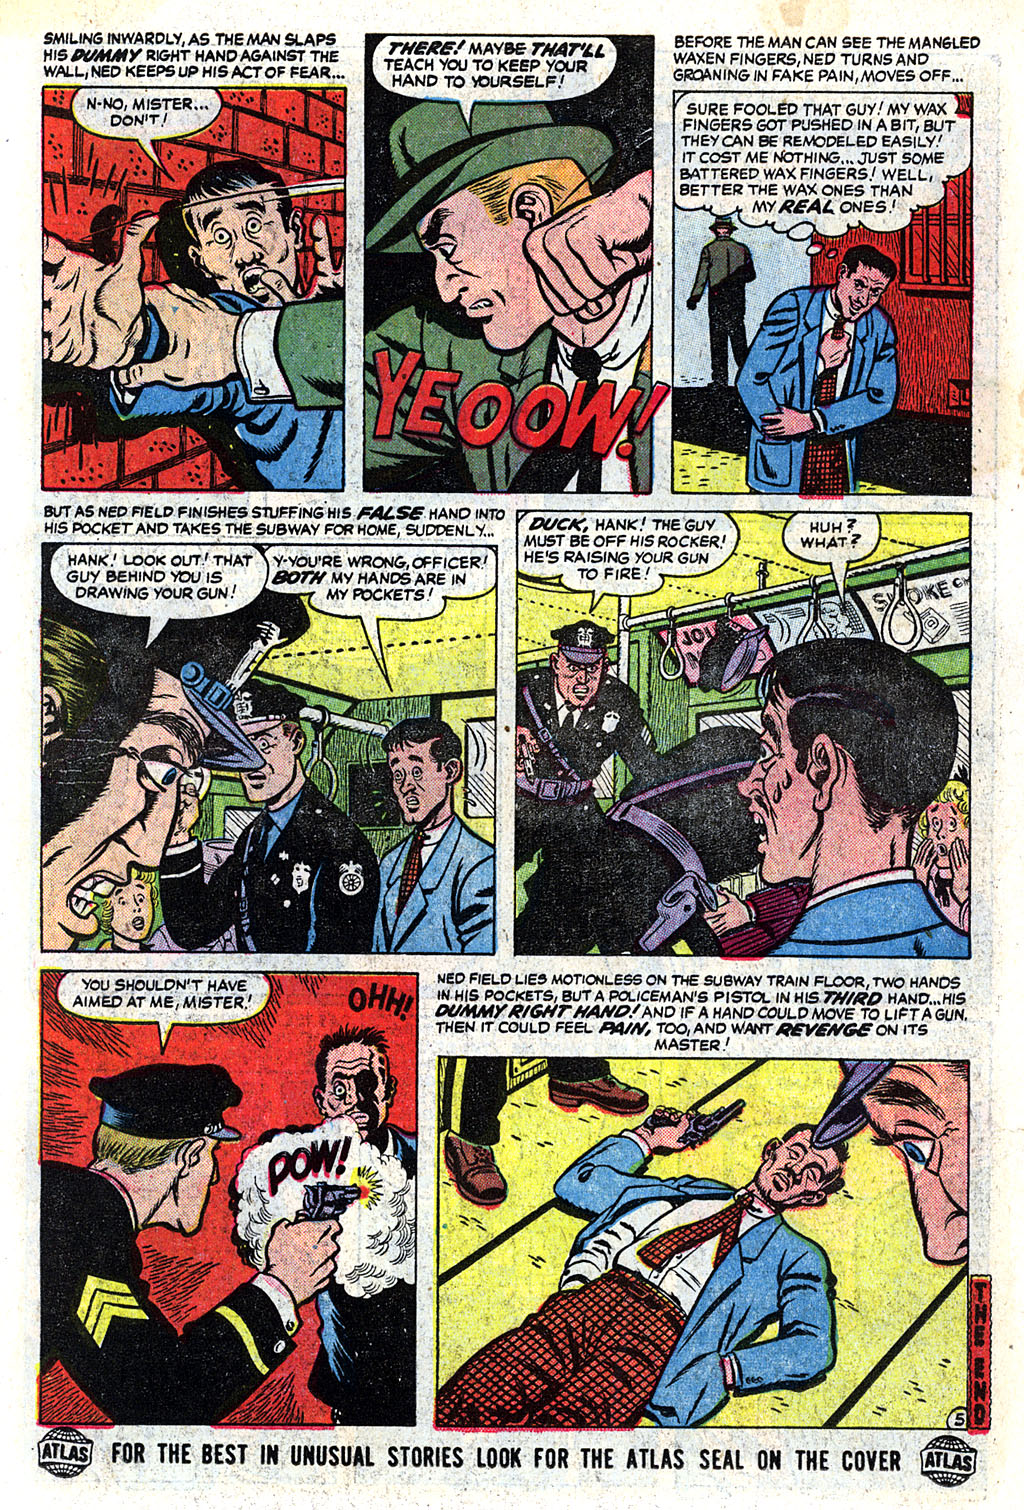 Marvel Tales (1949) 131 Page 13